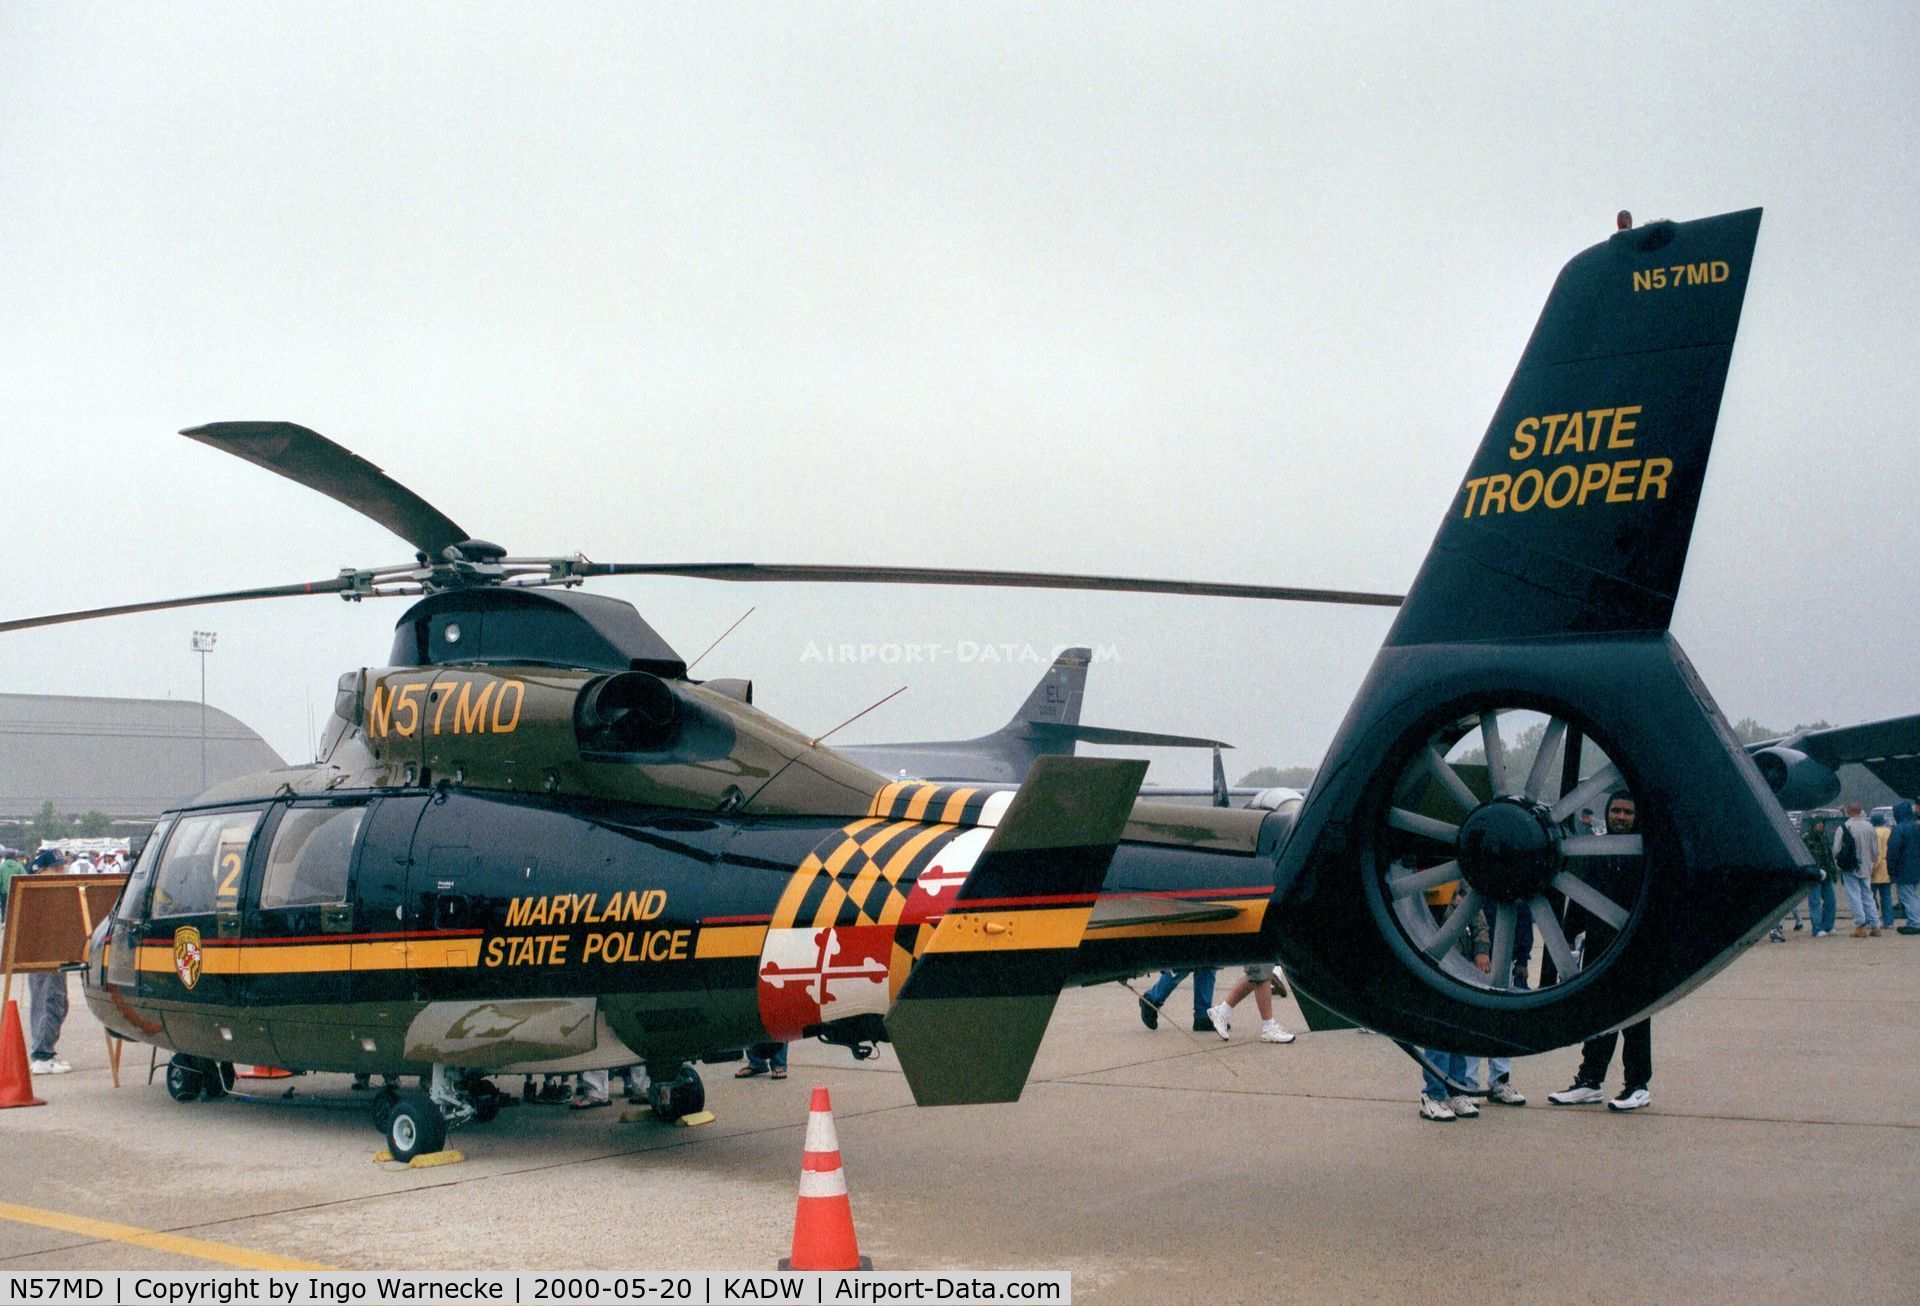 N57MD, 1988 Aerospatiale SA-365N-1 Dauphin 2 C/N 6252, Aerospatiale SA.365N1 Dauphin II of the Maryland State Police at Andrews AFB during Armed Forces Day 2000